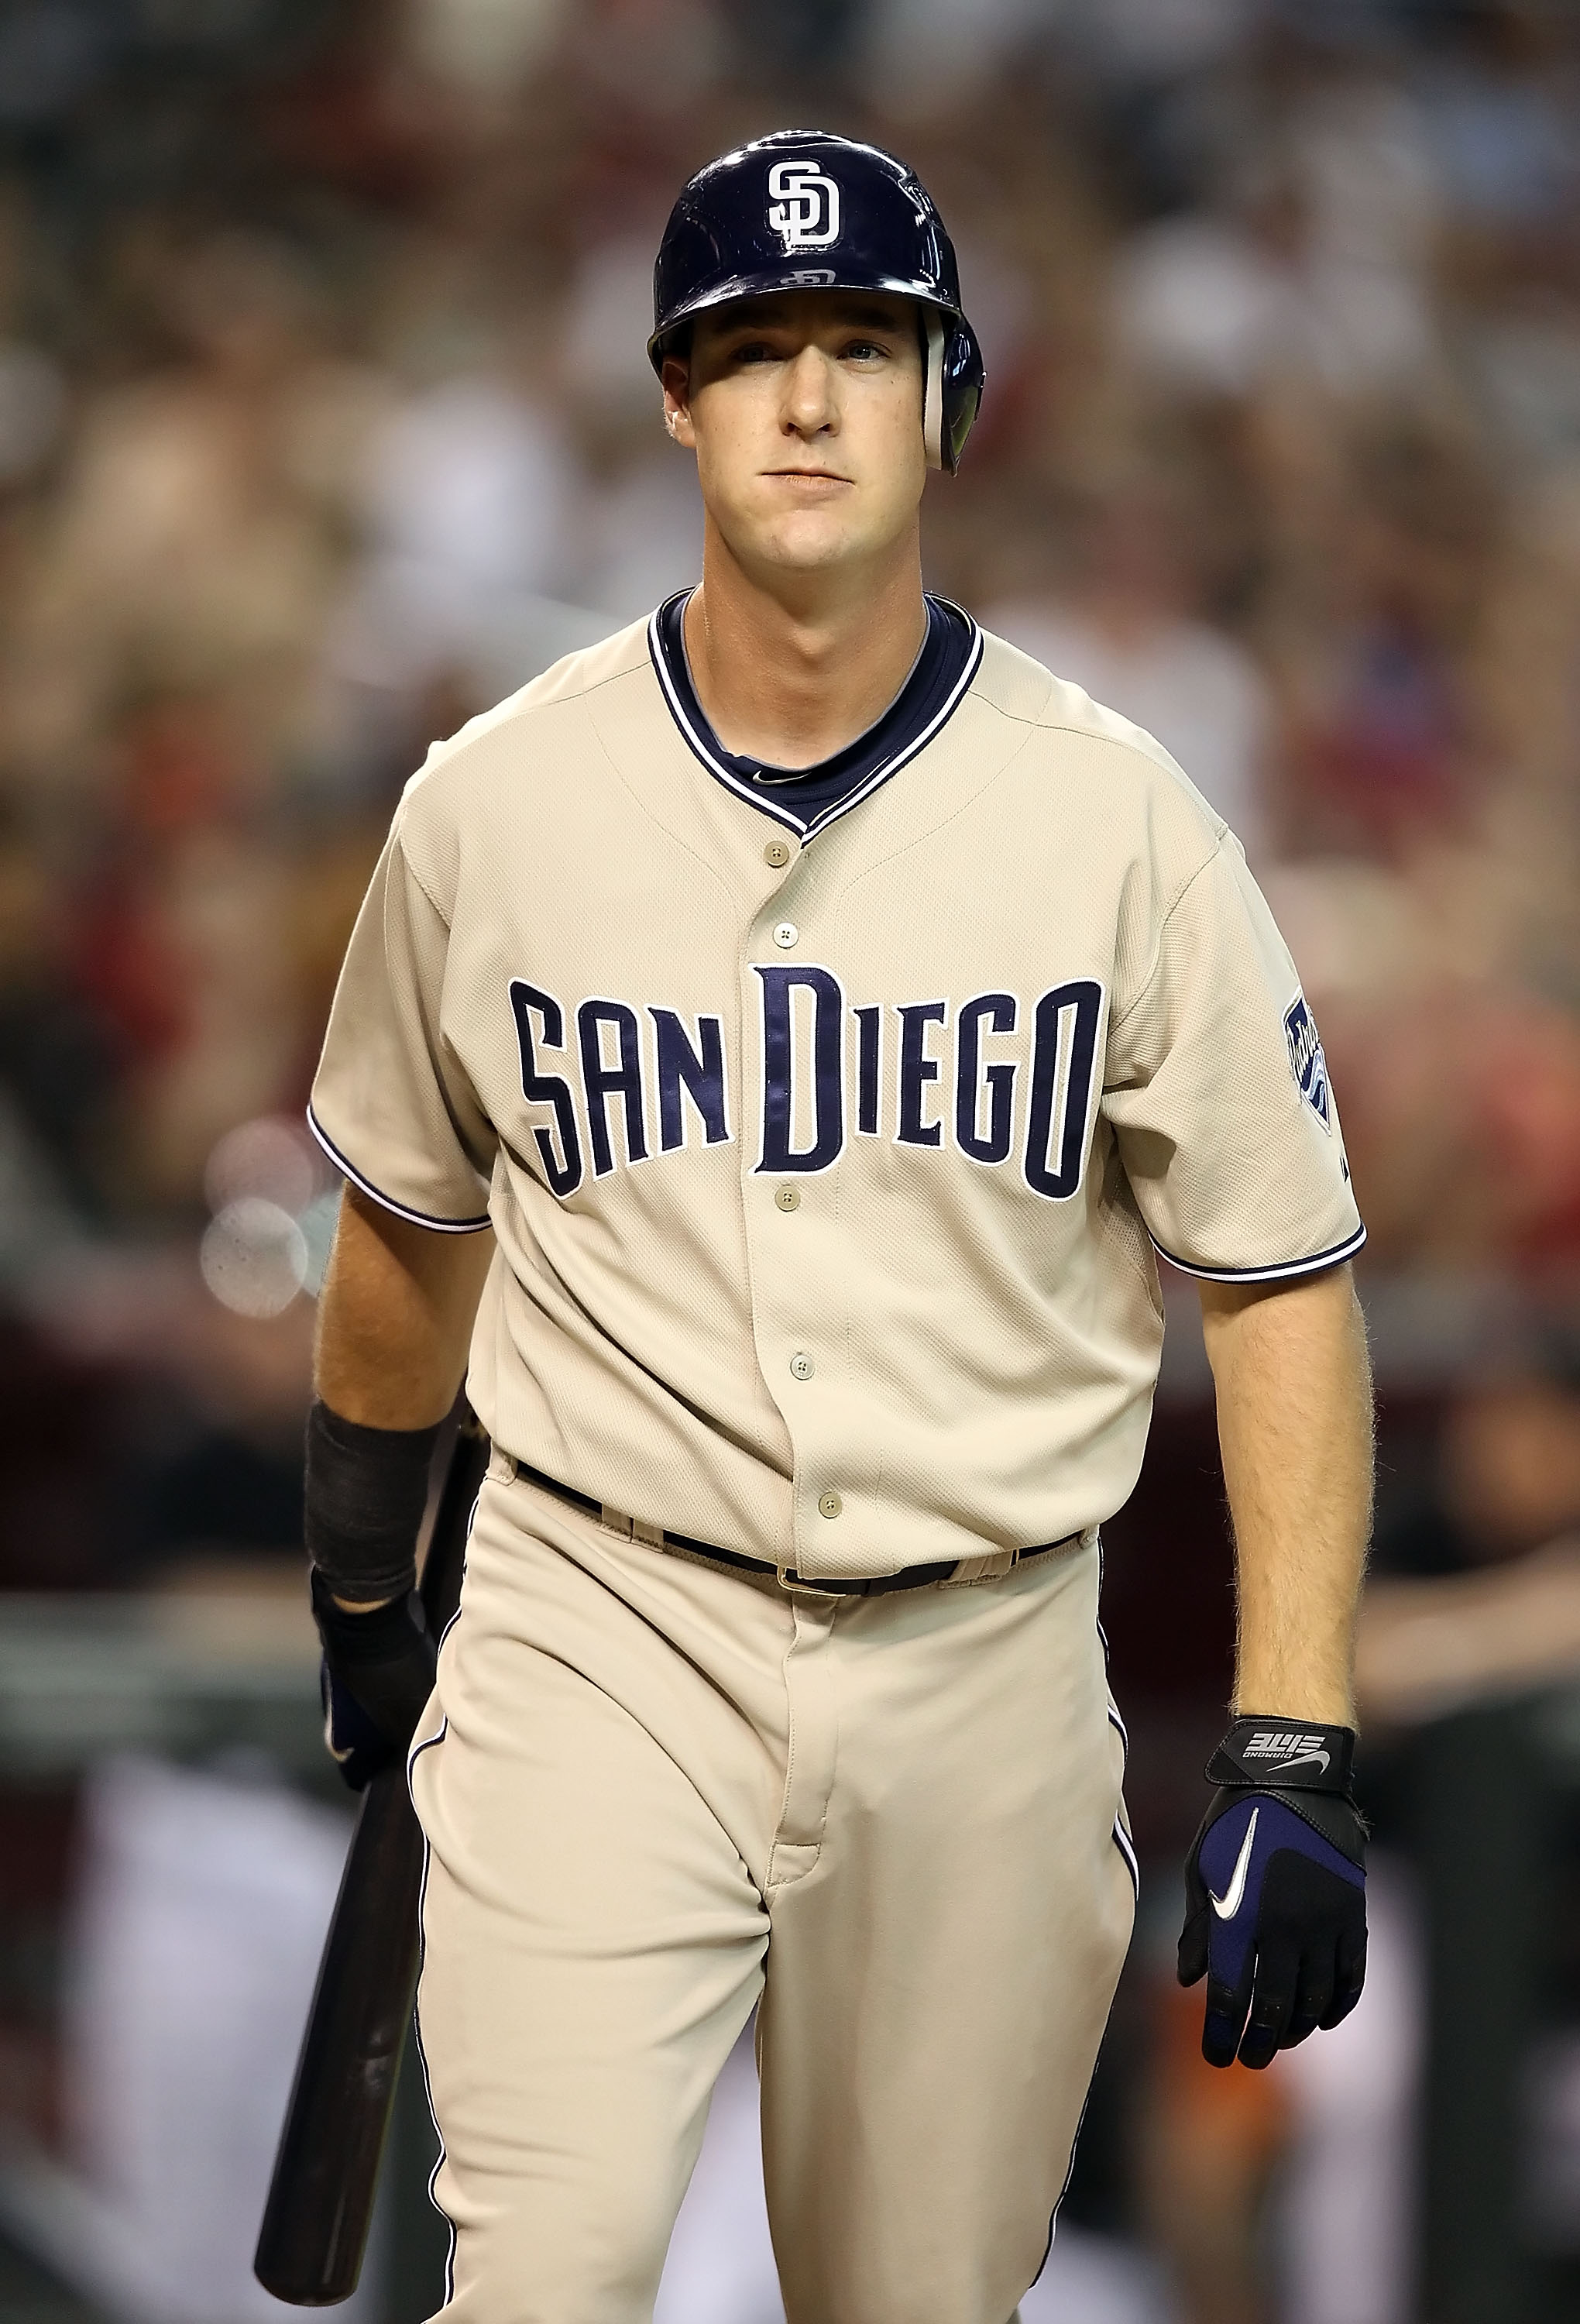 PHOENIX - AUGUST 07:  Ryan Ludwick #47 of the San Diego Padres reacts after striking out against the Arizona Diamondbacks during the Major League Baseball game at Chase Field on August 7, 2010 in Phoenix, Arizona. The Diamondbacks defeated the Padres 6-5.